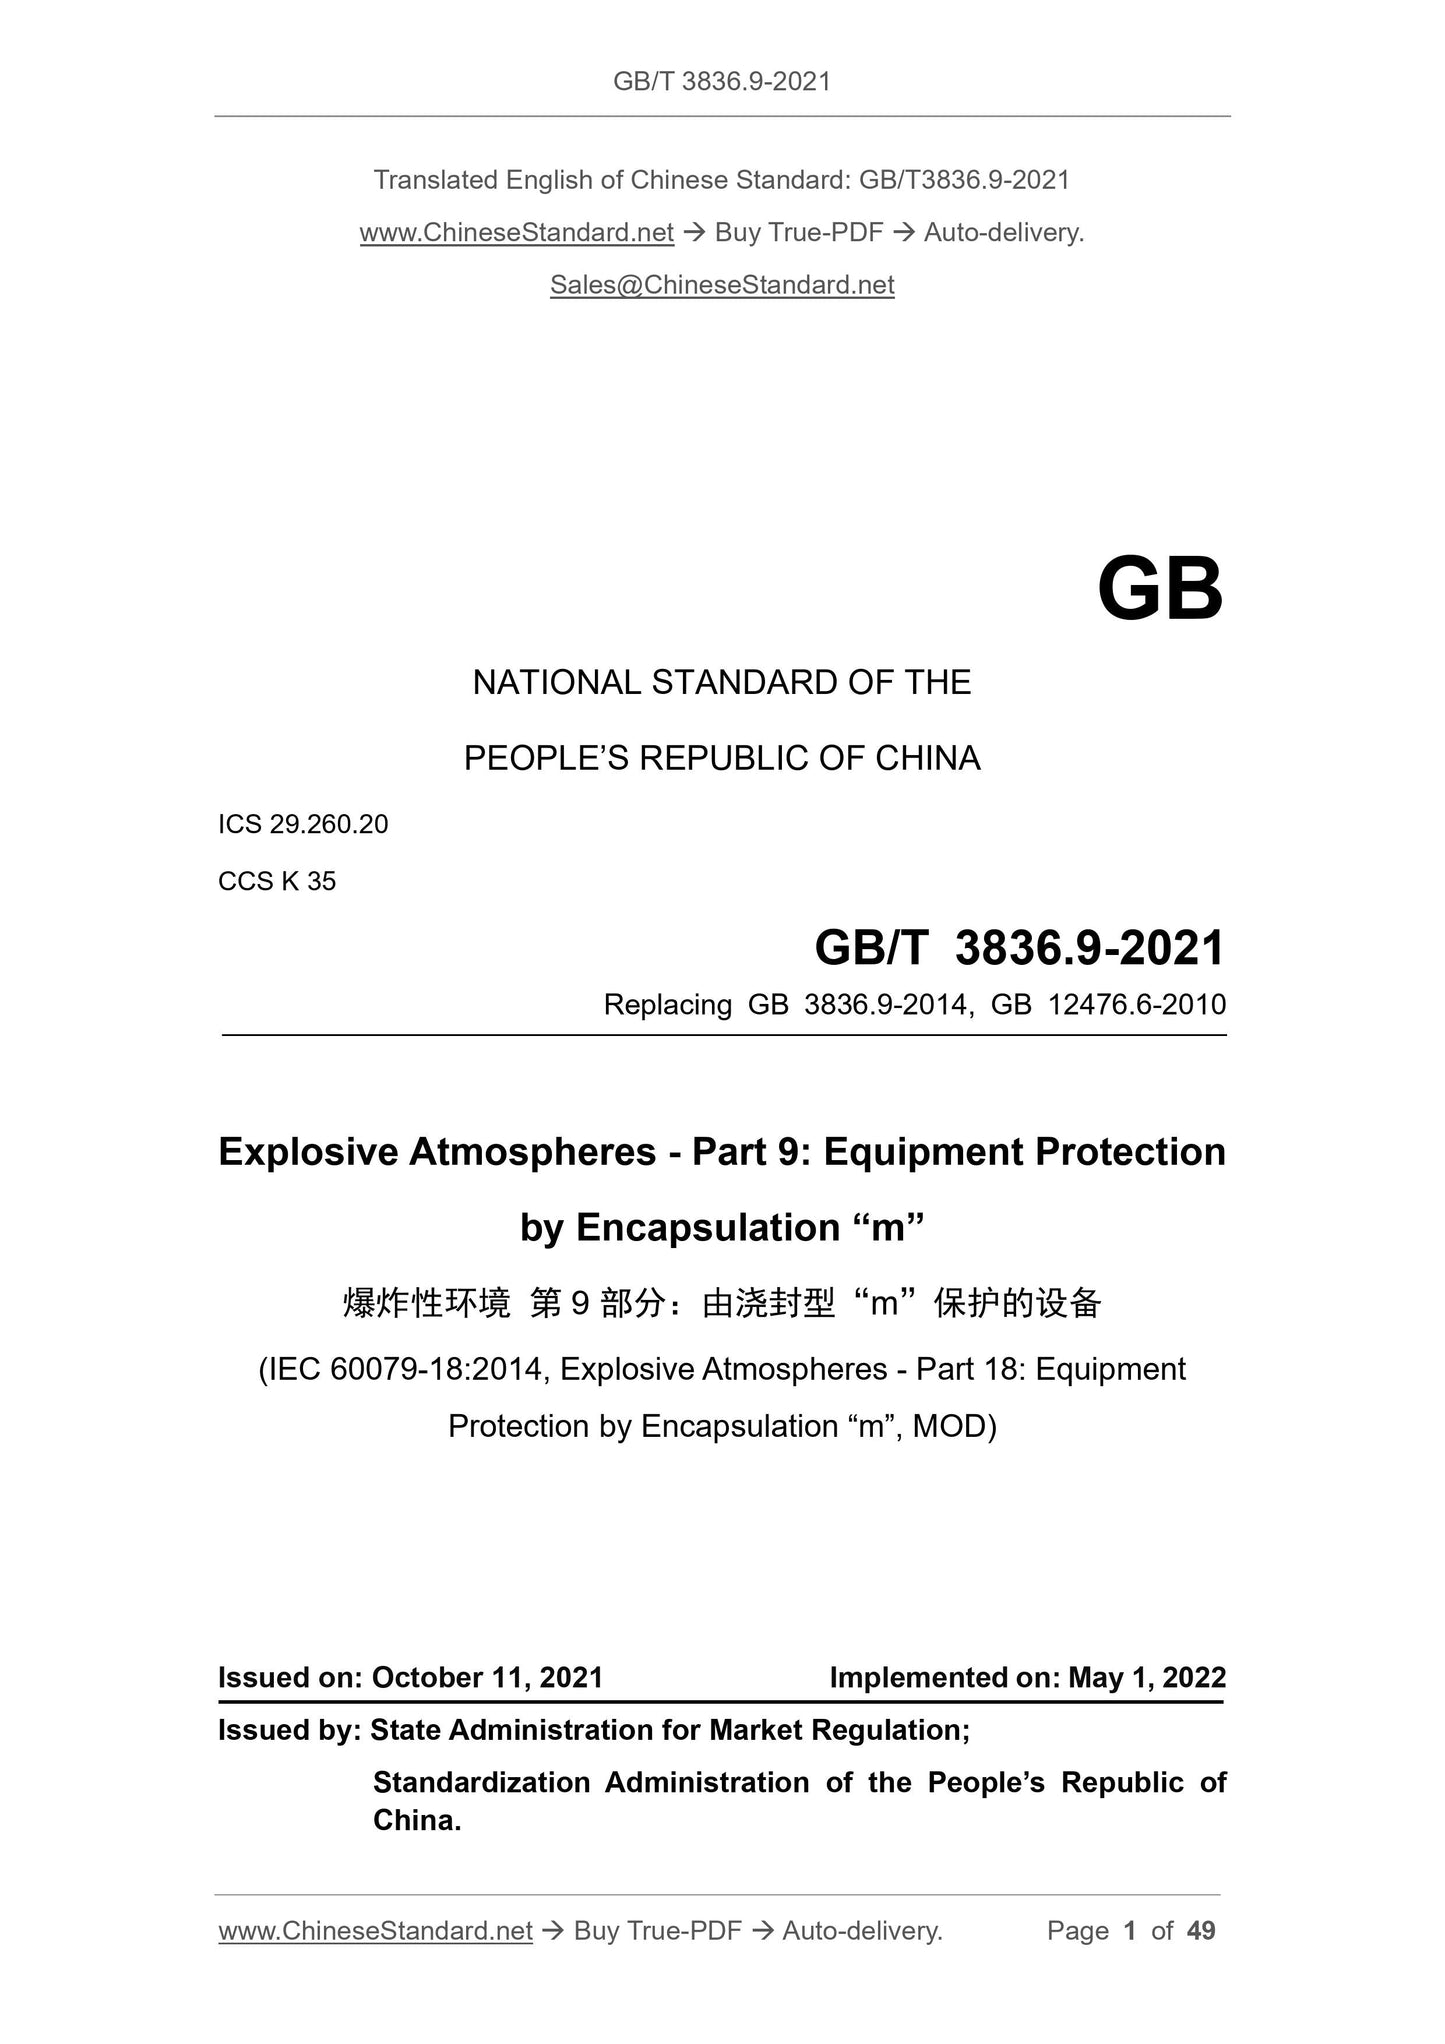 GB/T 3836.9-2021 Page 1